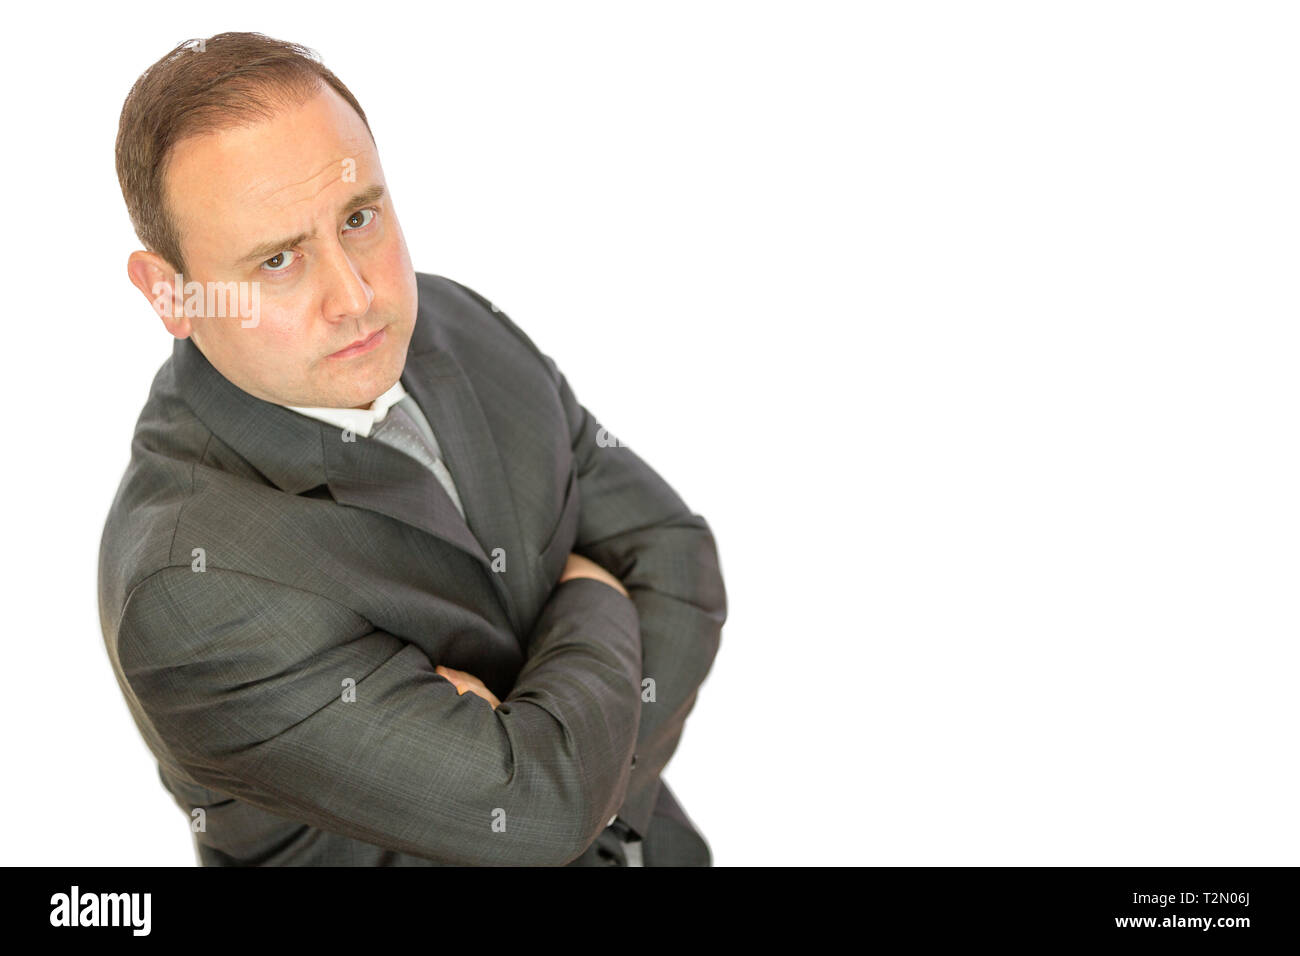 A serious-looking, concerned business manager with folded arms on a white background with copy space. Stock Photo